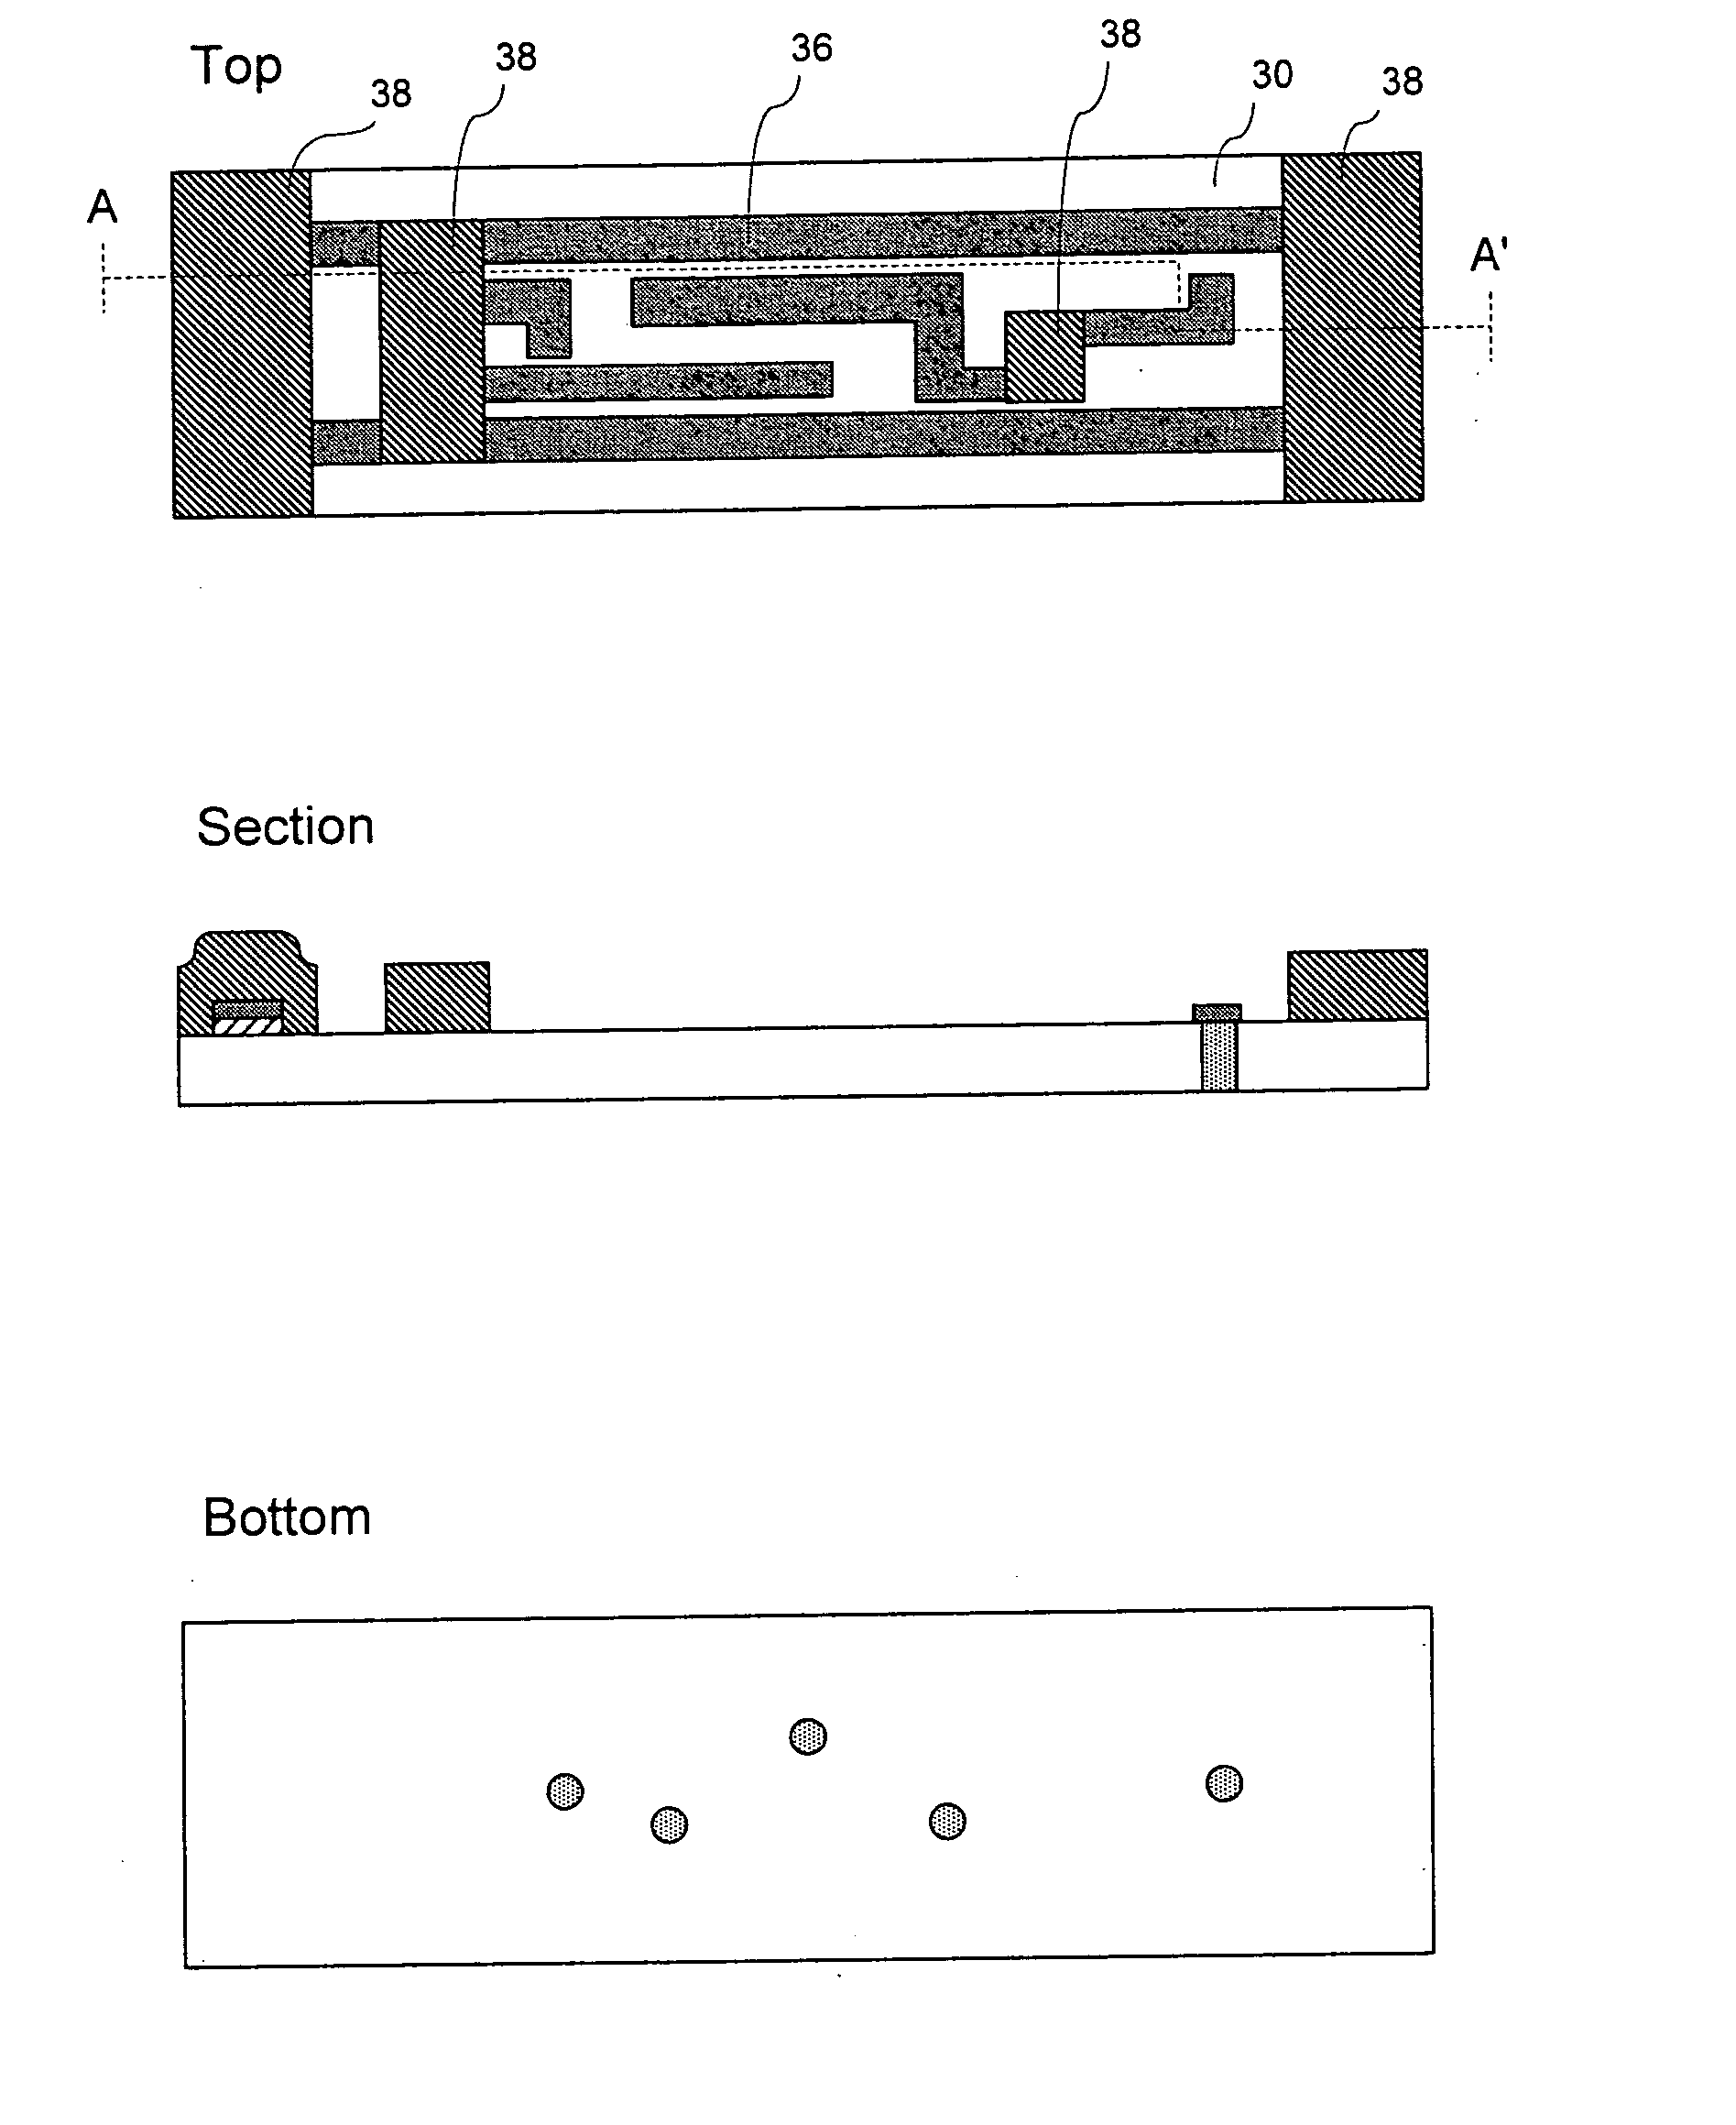 High reliability multlayer circuit substrates and methods for their formation